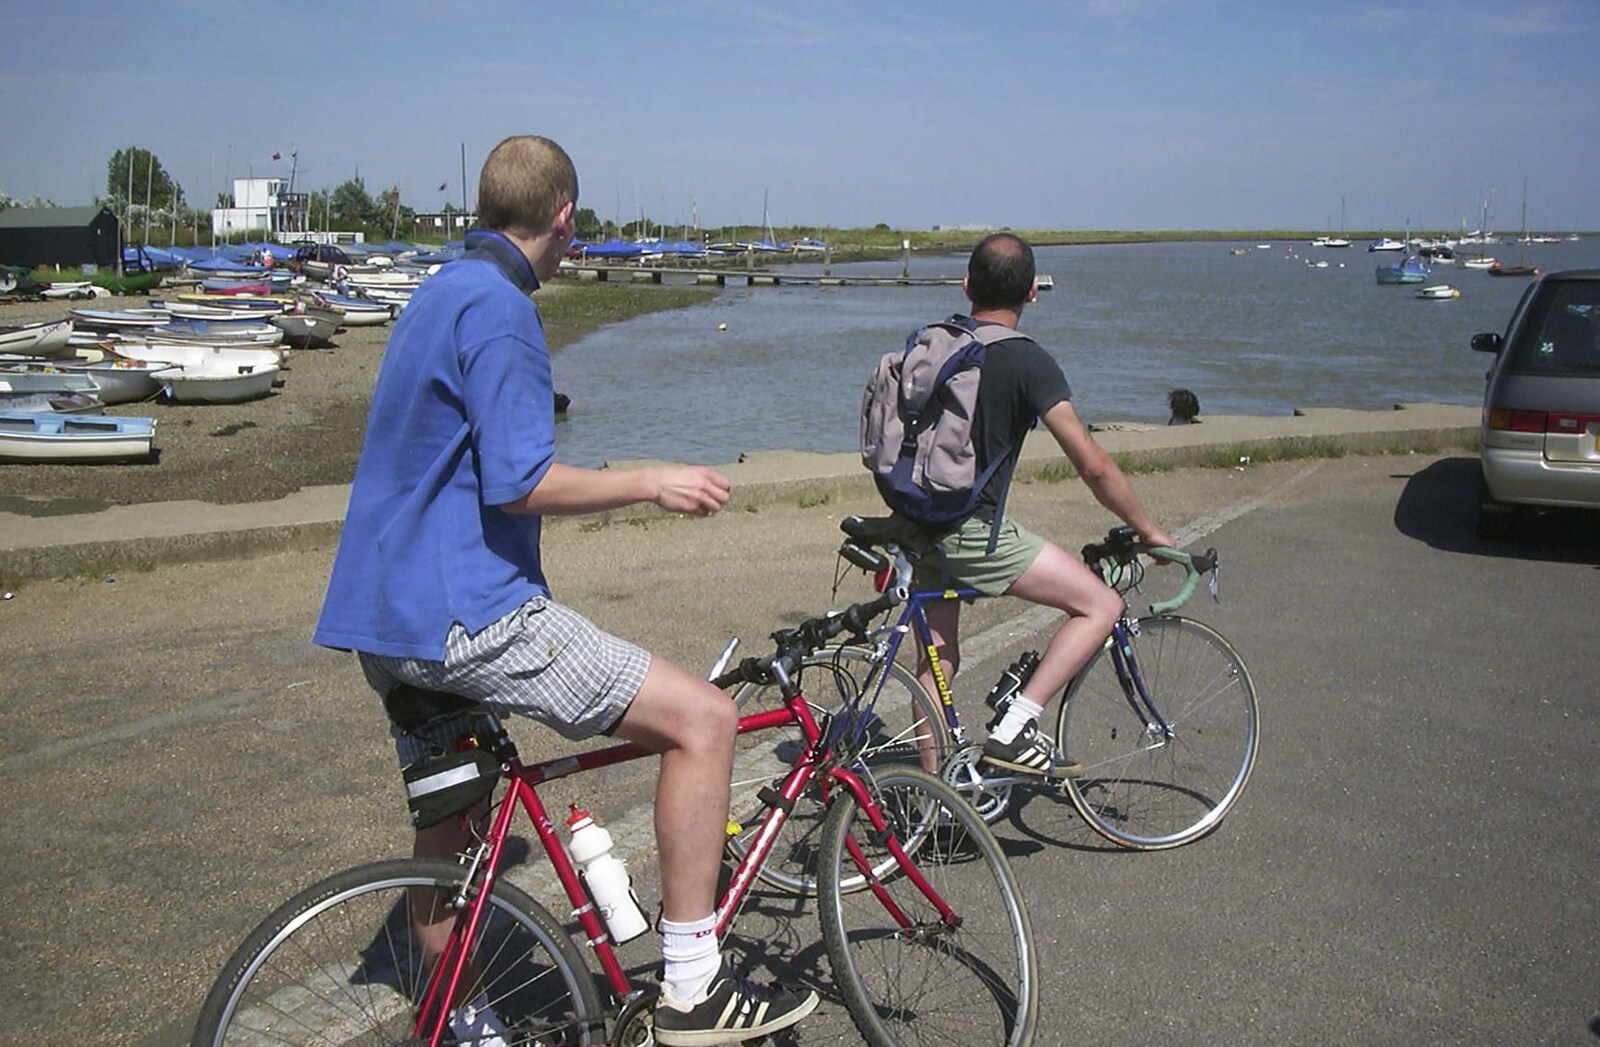 The BSCC Annual Bike Ride, Orford, Suffolk - 12th July 2003: Bill and DH look out over the river at Orford Quay